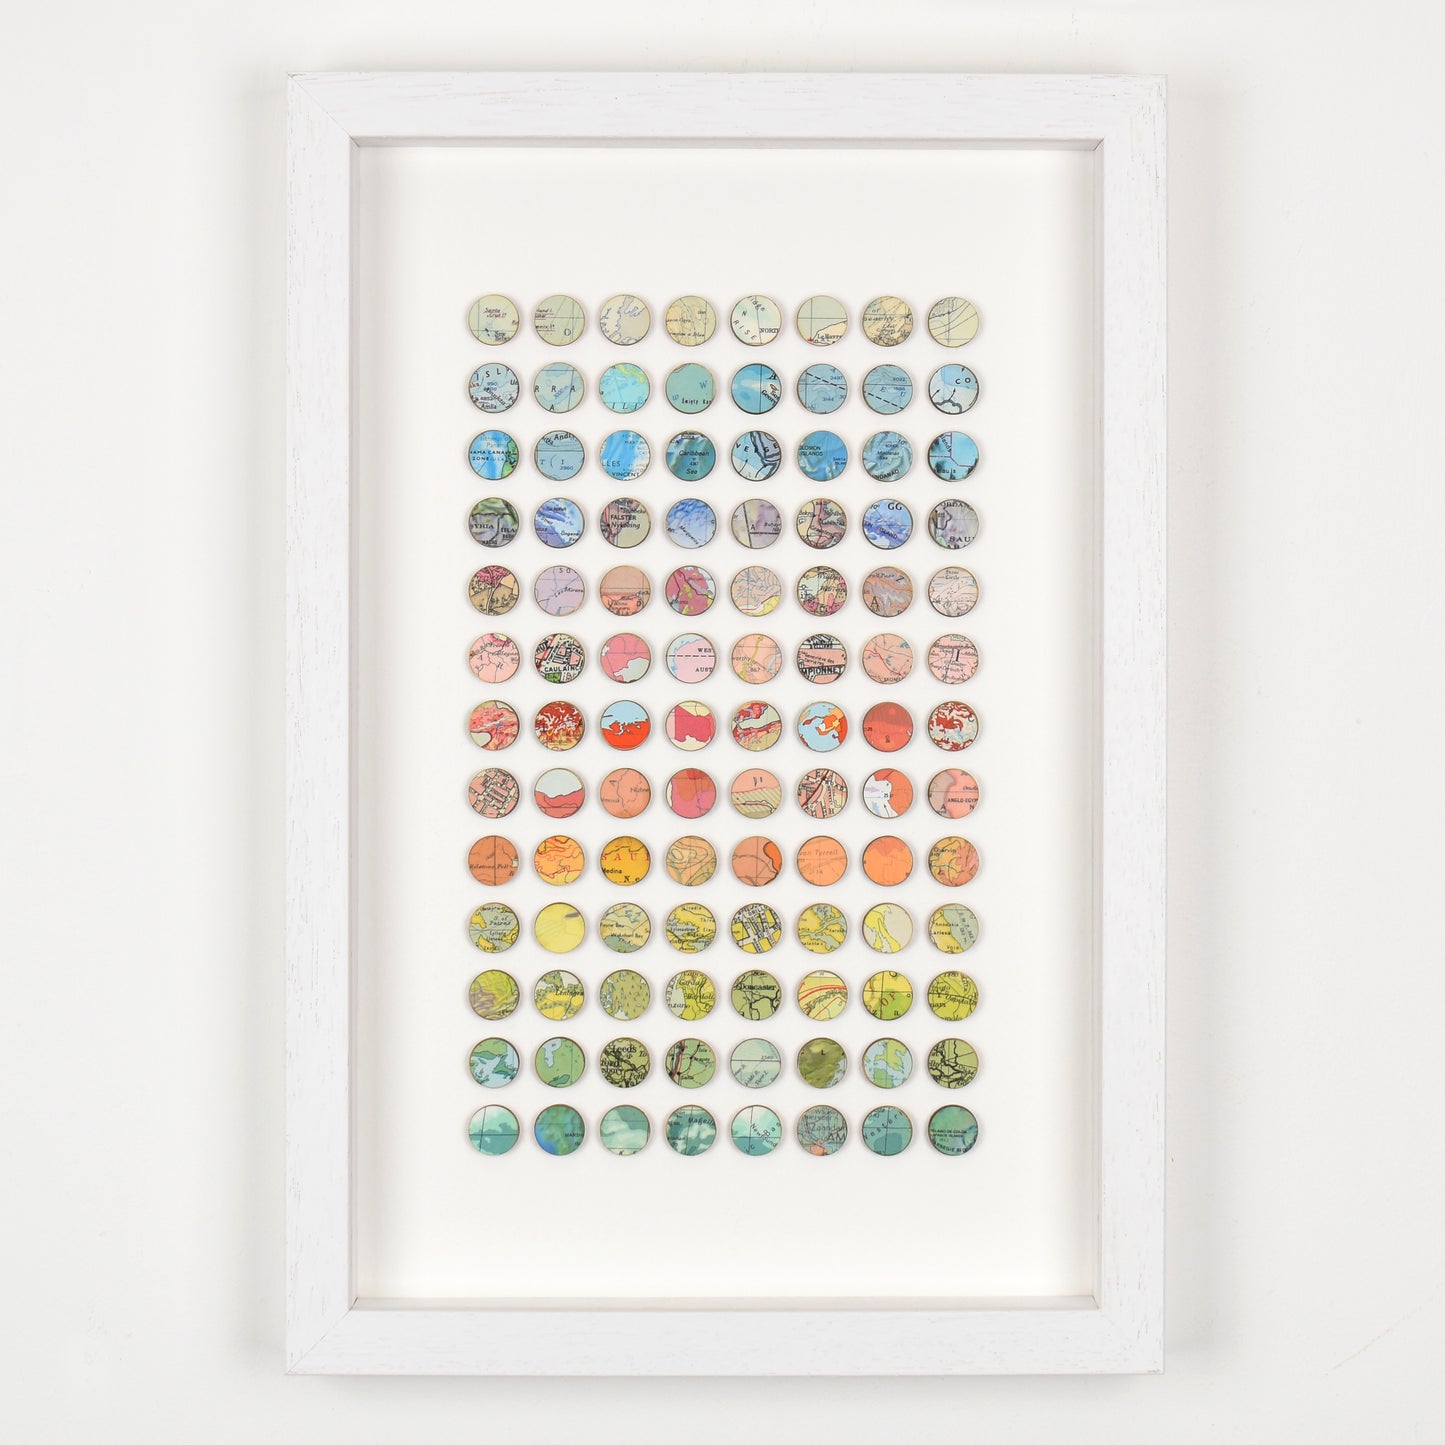 One Hundred and Four London Map Dots Rainbow Collage